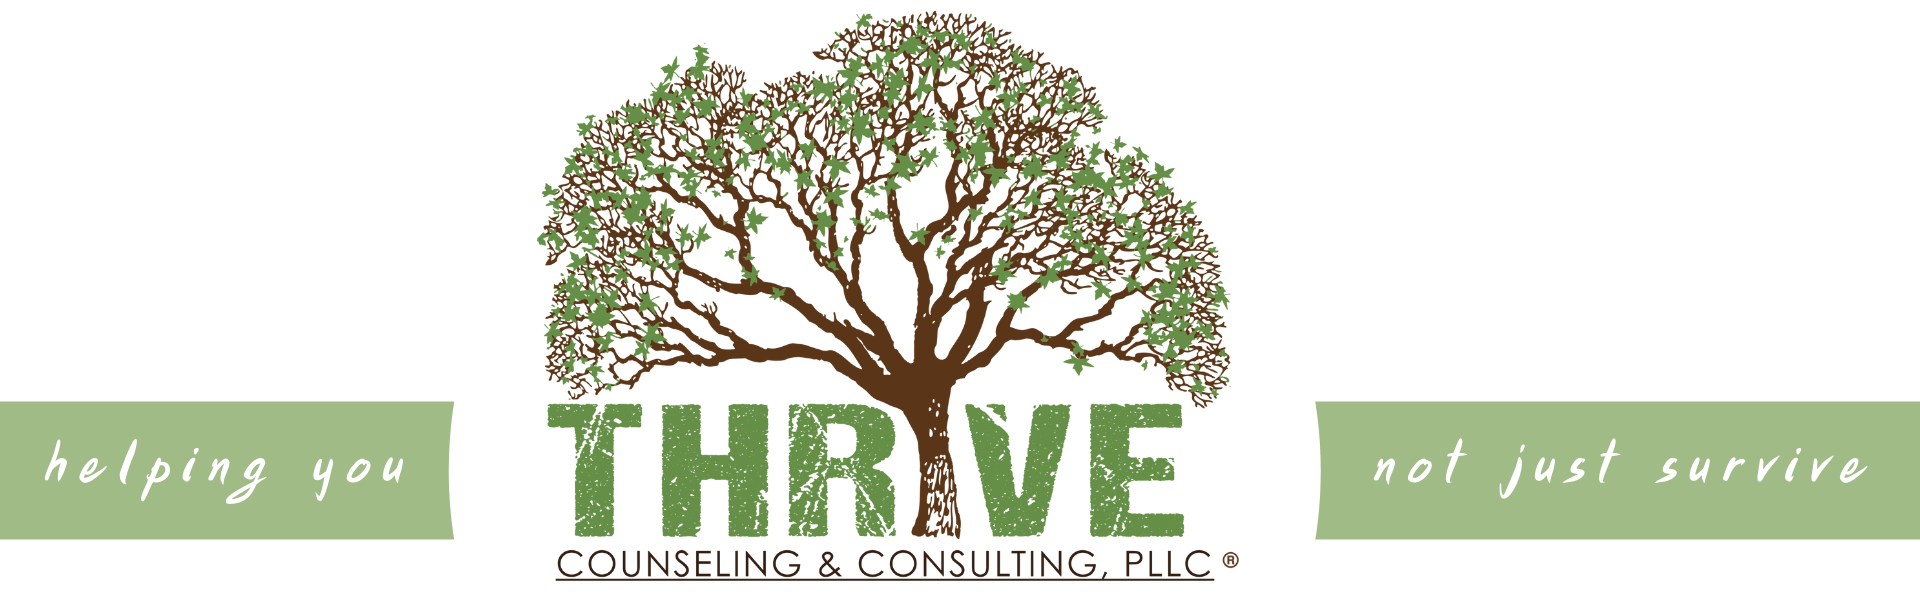 Thrive Counseling & Consulting, PLLC Logo